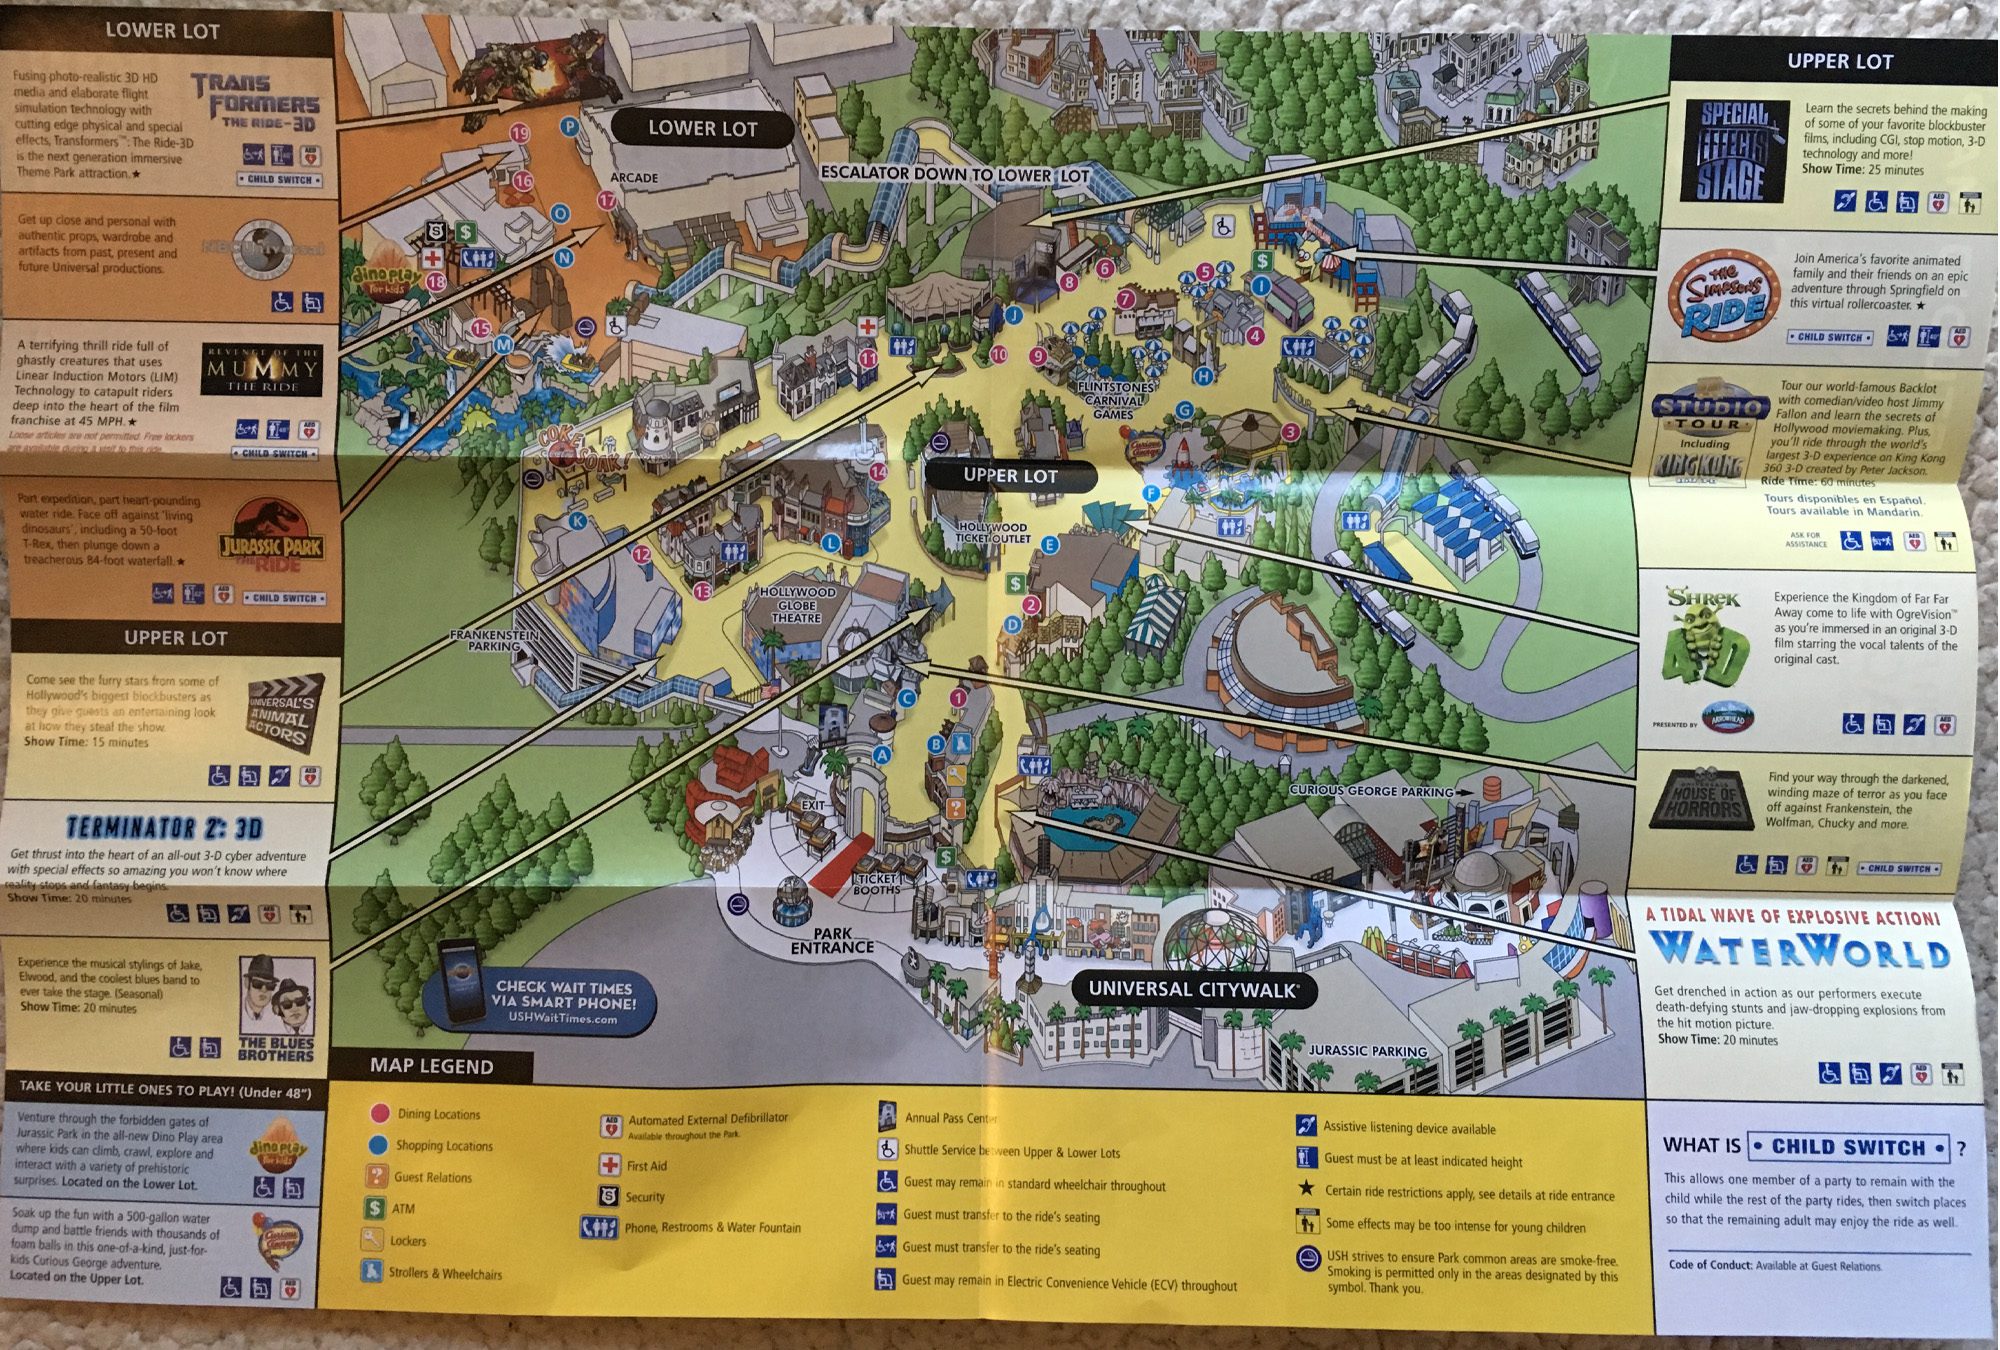 downloadable map of universal studios hollywood